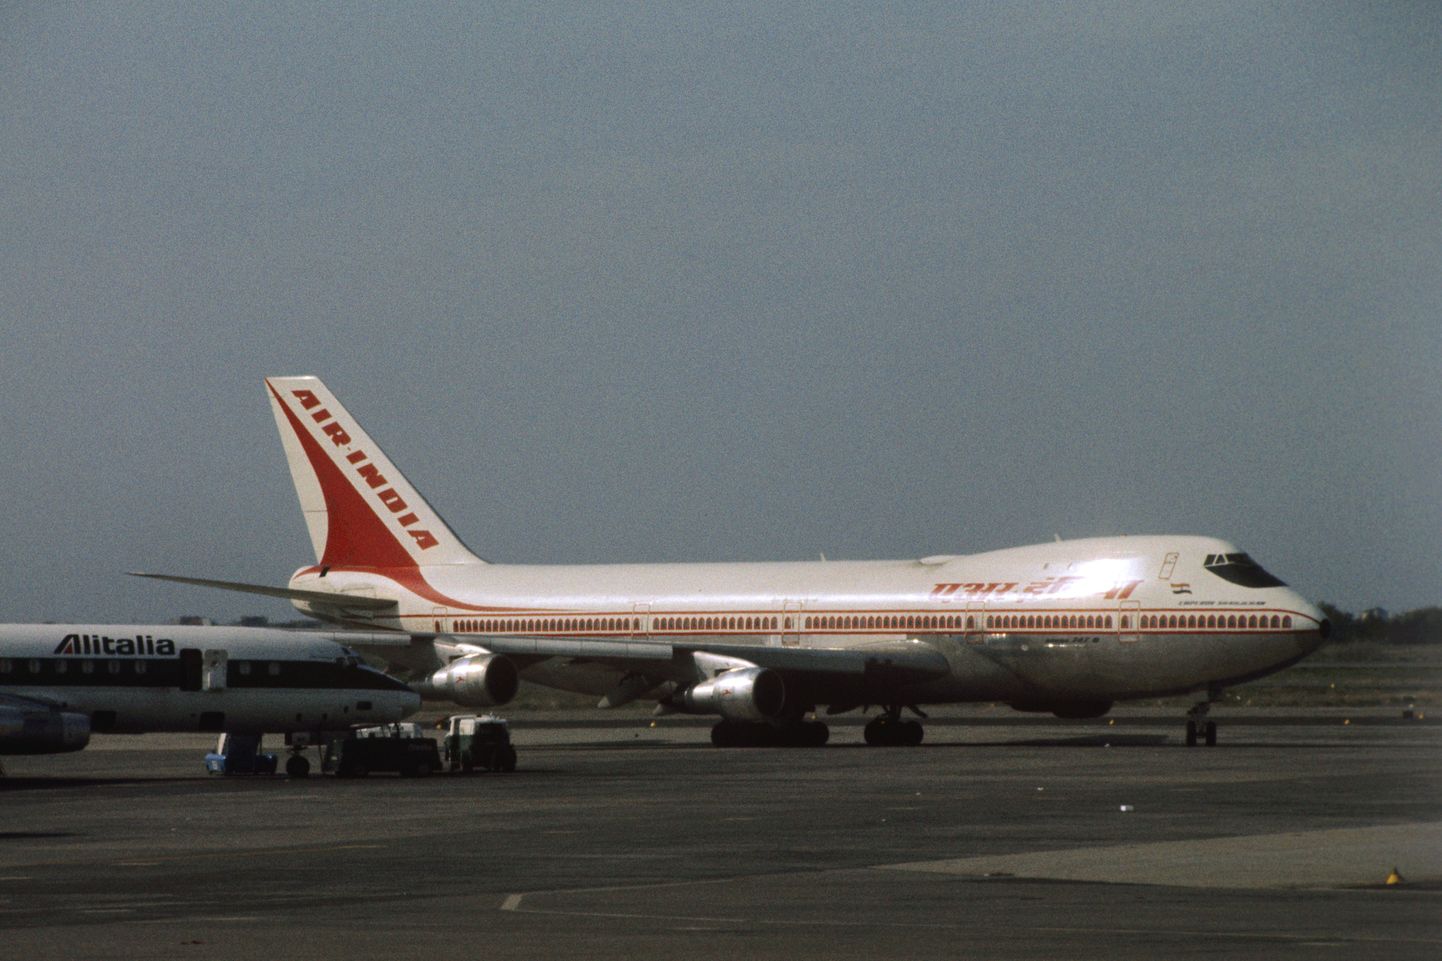 Am Air India Boeing 747 seen at Rome Airport